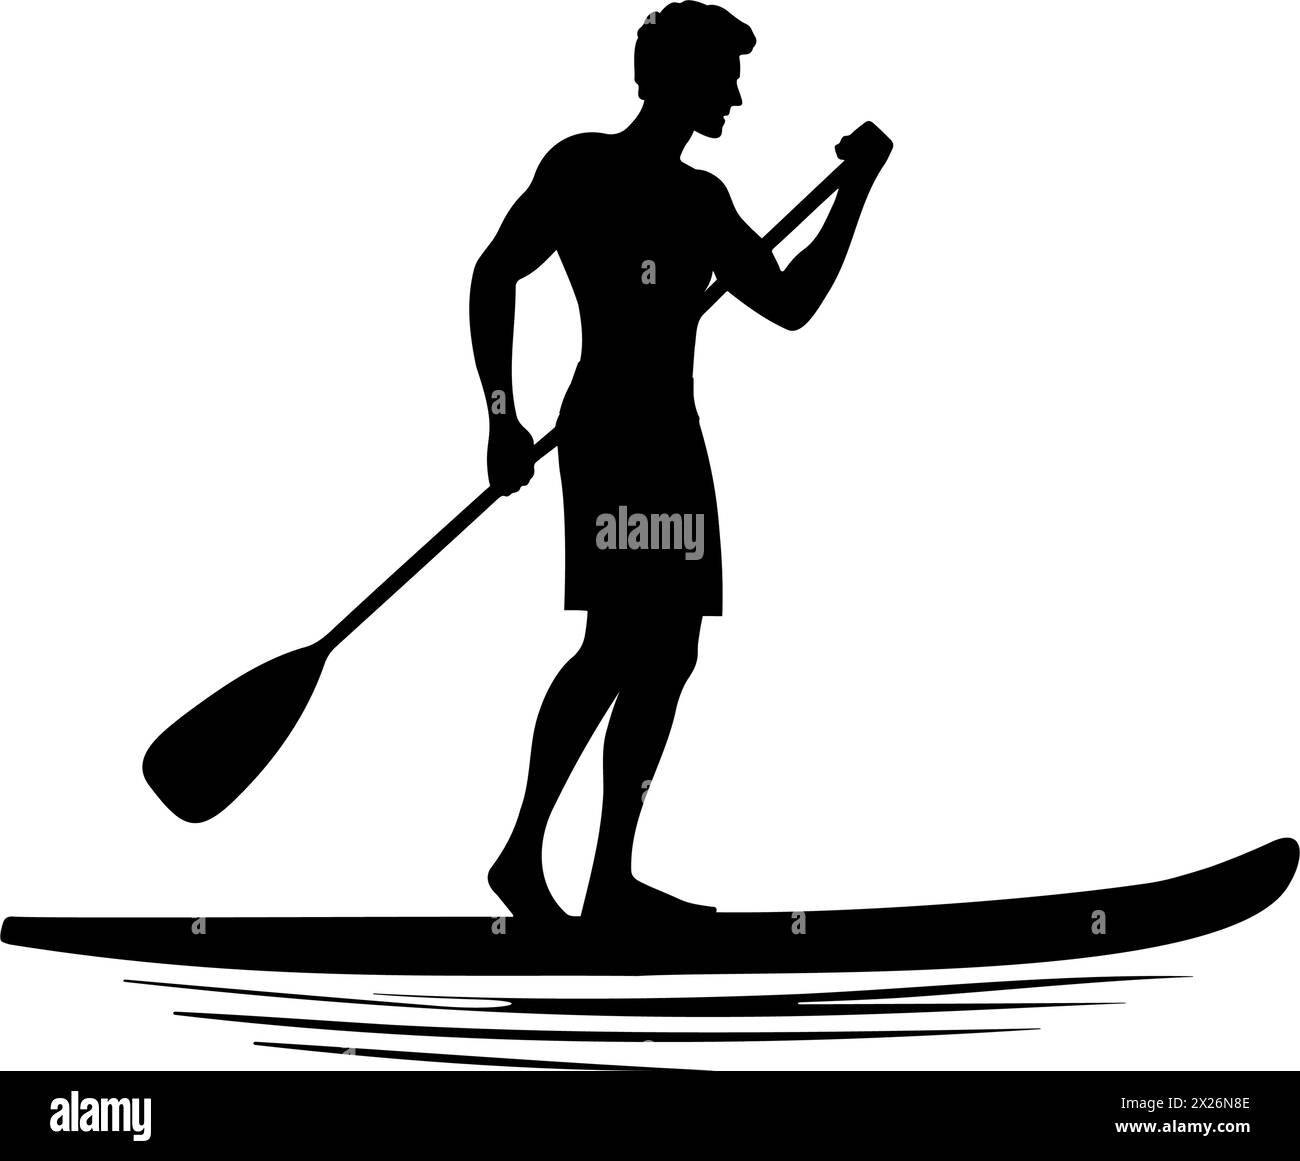 Man Paddle boarder silhouette. Vector illustration Stock Vector